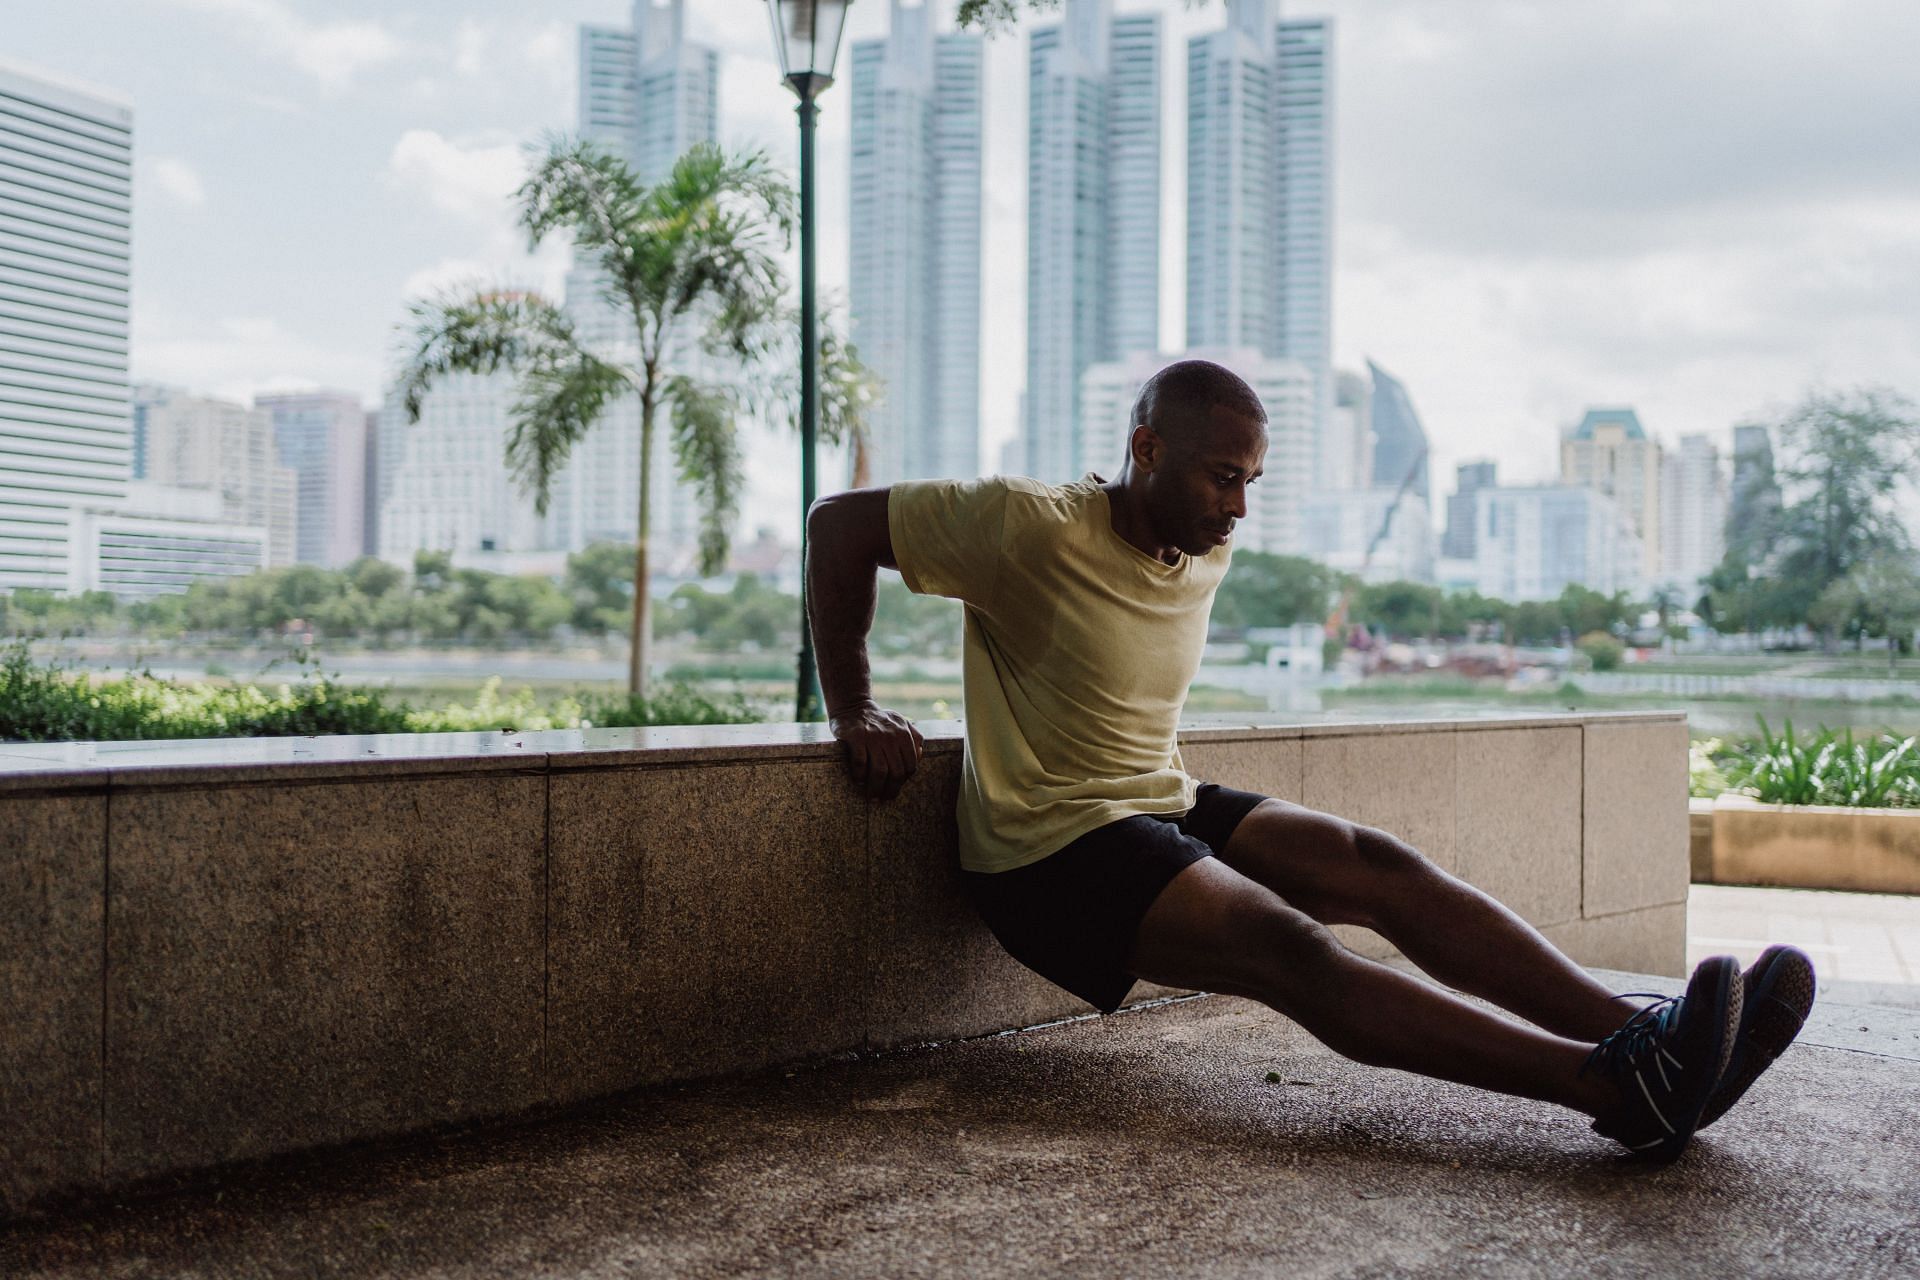 Reverse dip is a great bodyweight workouts and can help develop triceps. (Image via Pexels /Ketut Subiyanto)